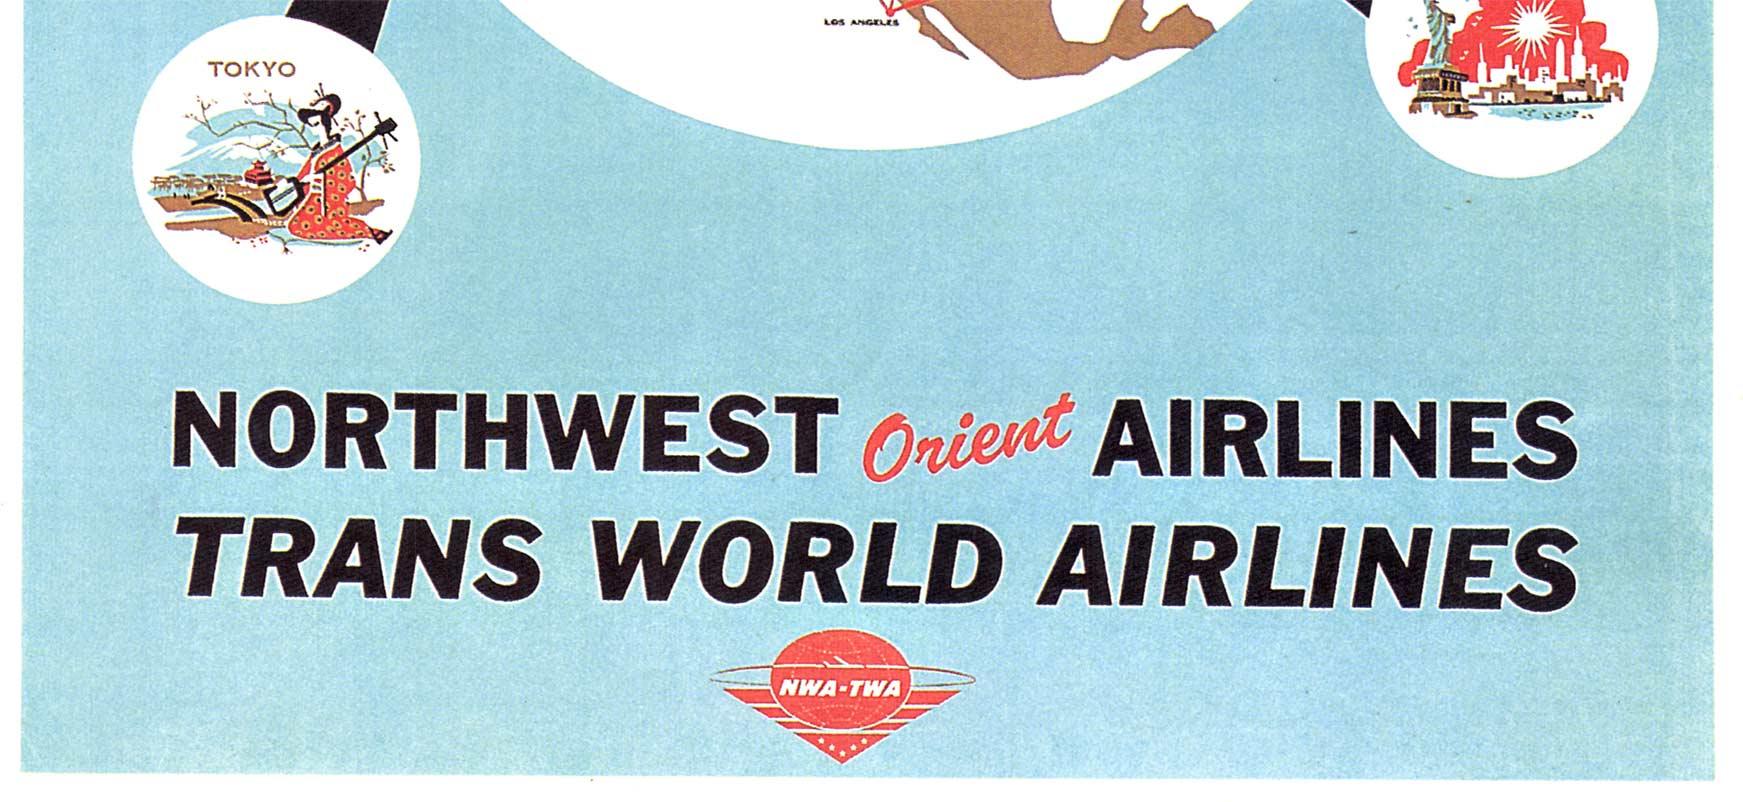 Original 'Trans World Airlines Northwest Orient Airlines' vintage travel poster - Blue Figurative Print by Unknown